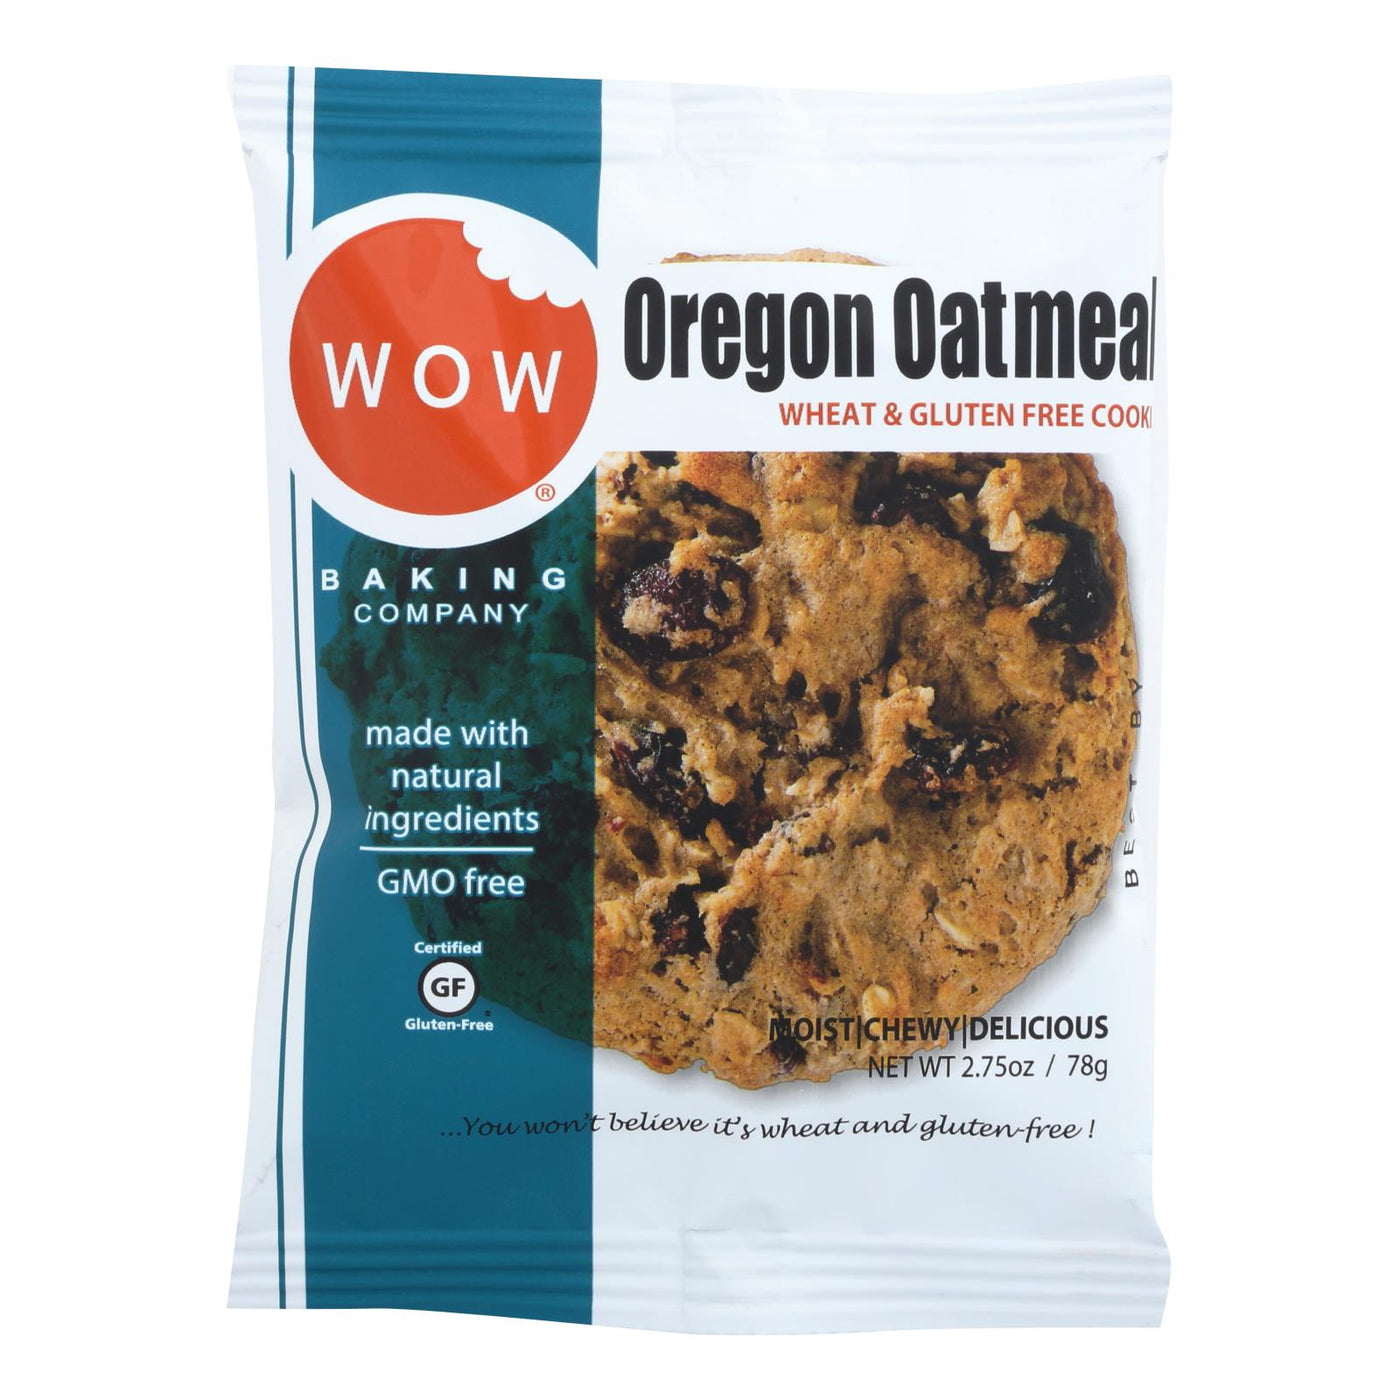 Wow Baking Cookie - Oregon Oatmeal - Case Of 12 - 2.75 Oz. | OnlyNaturals.us